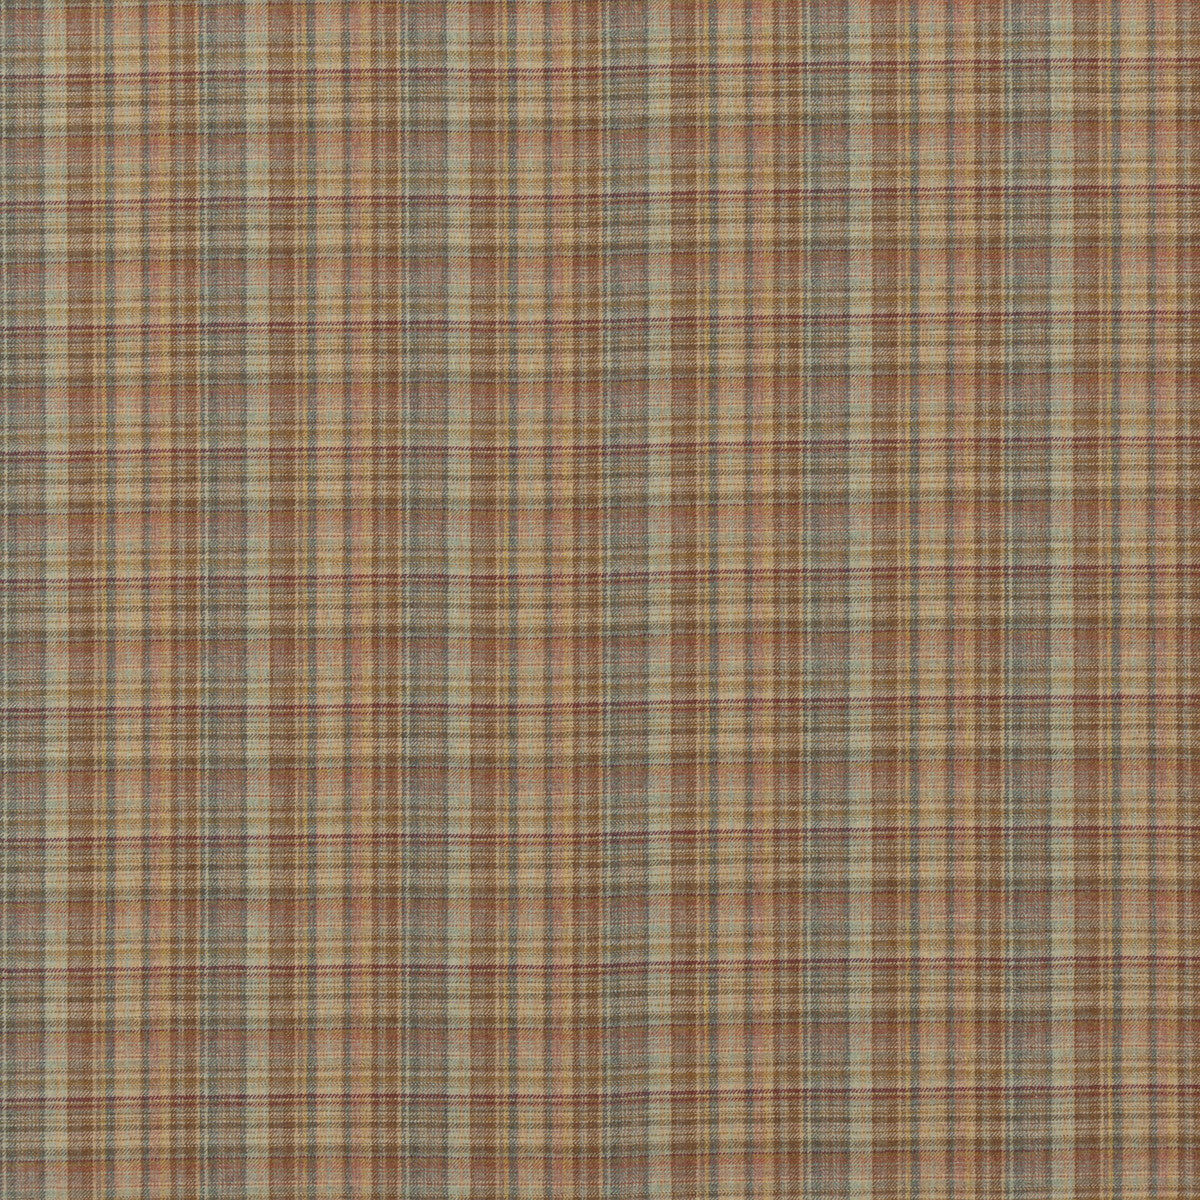 Mull fabric in russet color - pattern FD750.V55.0 - by Mulberry in the Festival collection